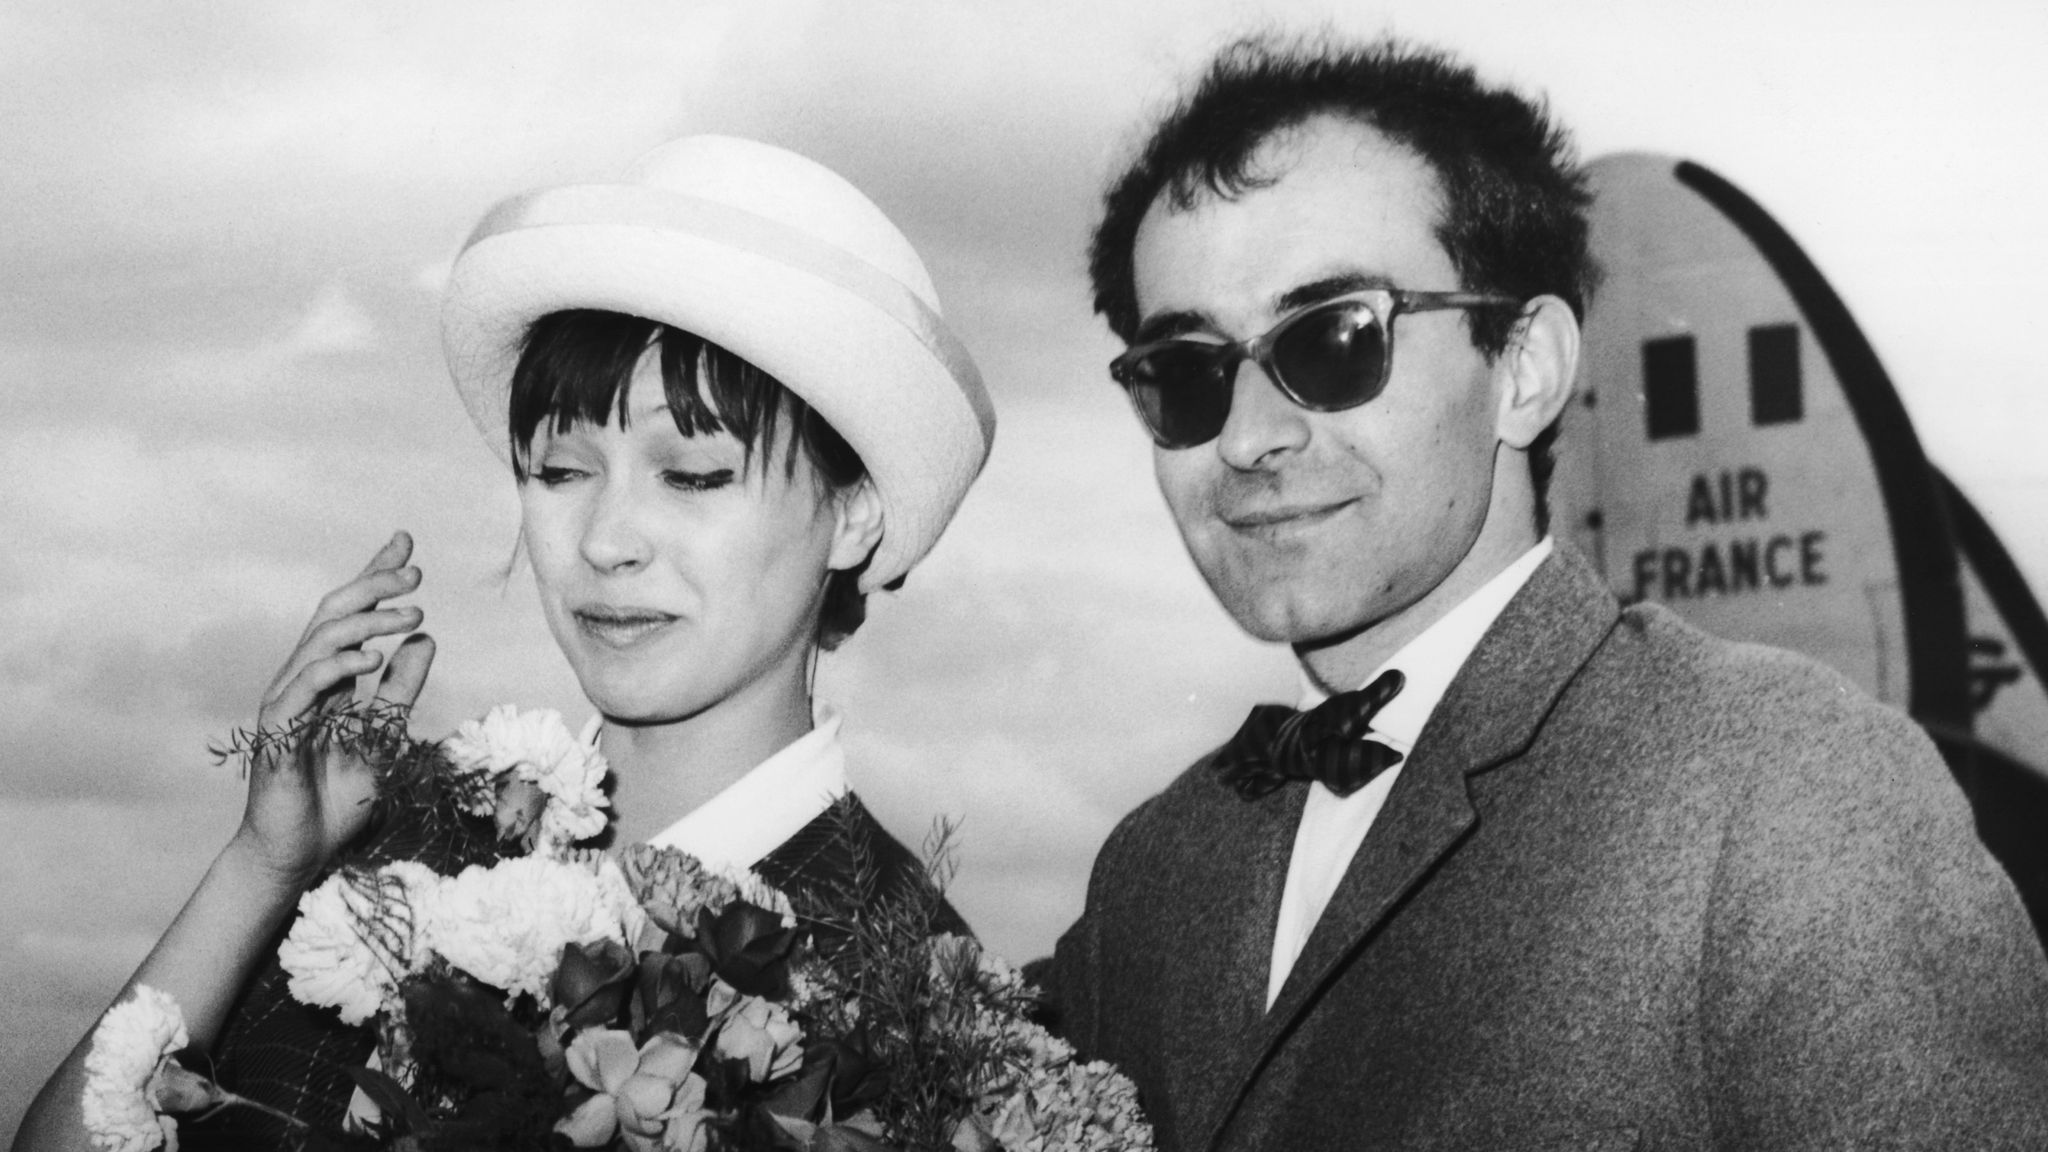 Anna Karina Icon Of 1960s French New Wave Cinema Dies Aged 79 Ents And Arts News Sky News 